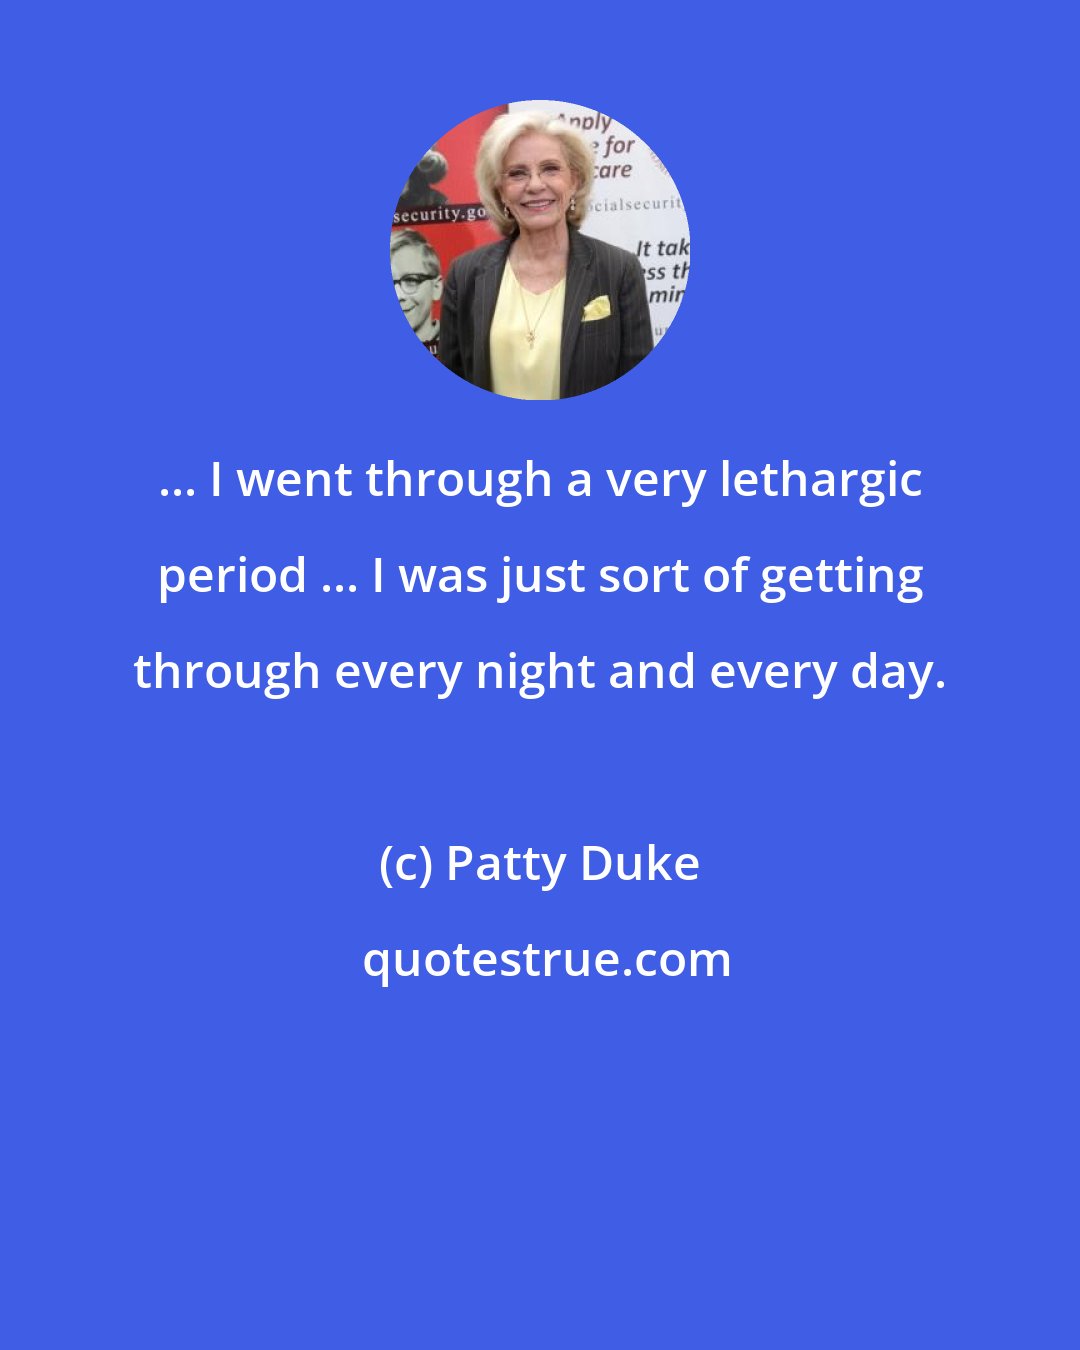 Patty Duke: ... I went through a very lethargic period ... I was just sort of getting through every night and every day.